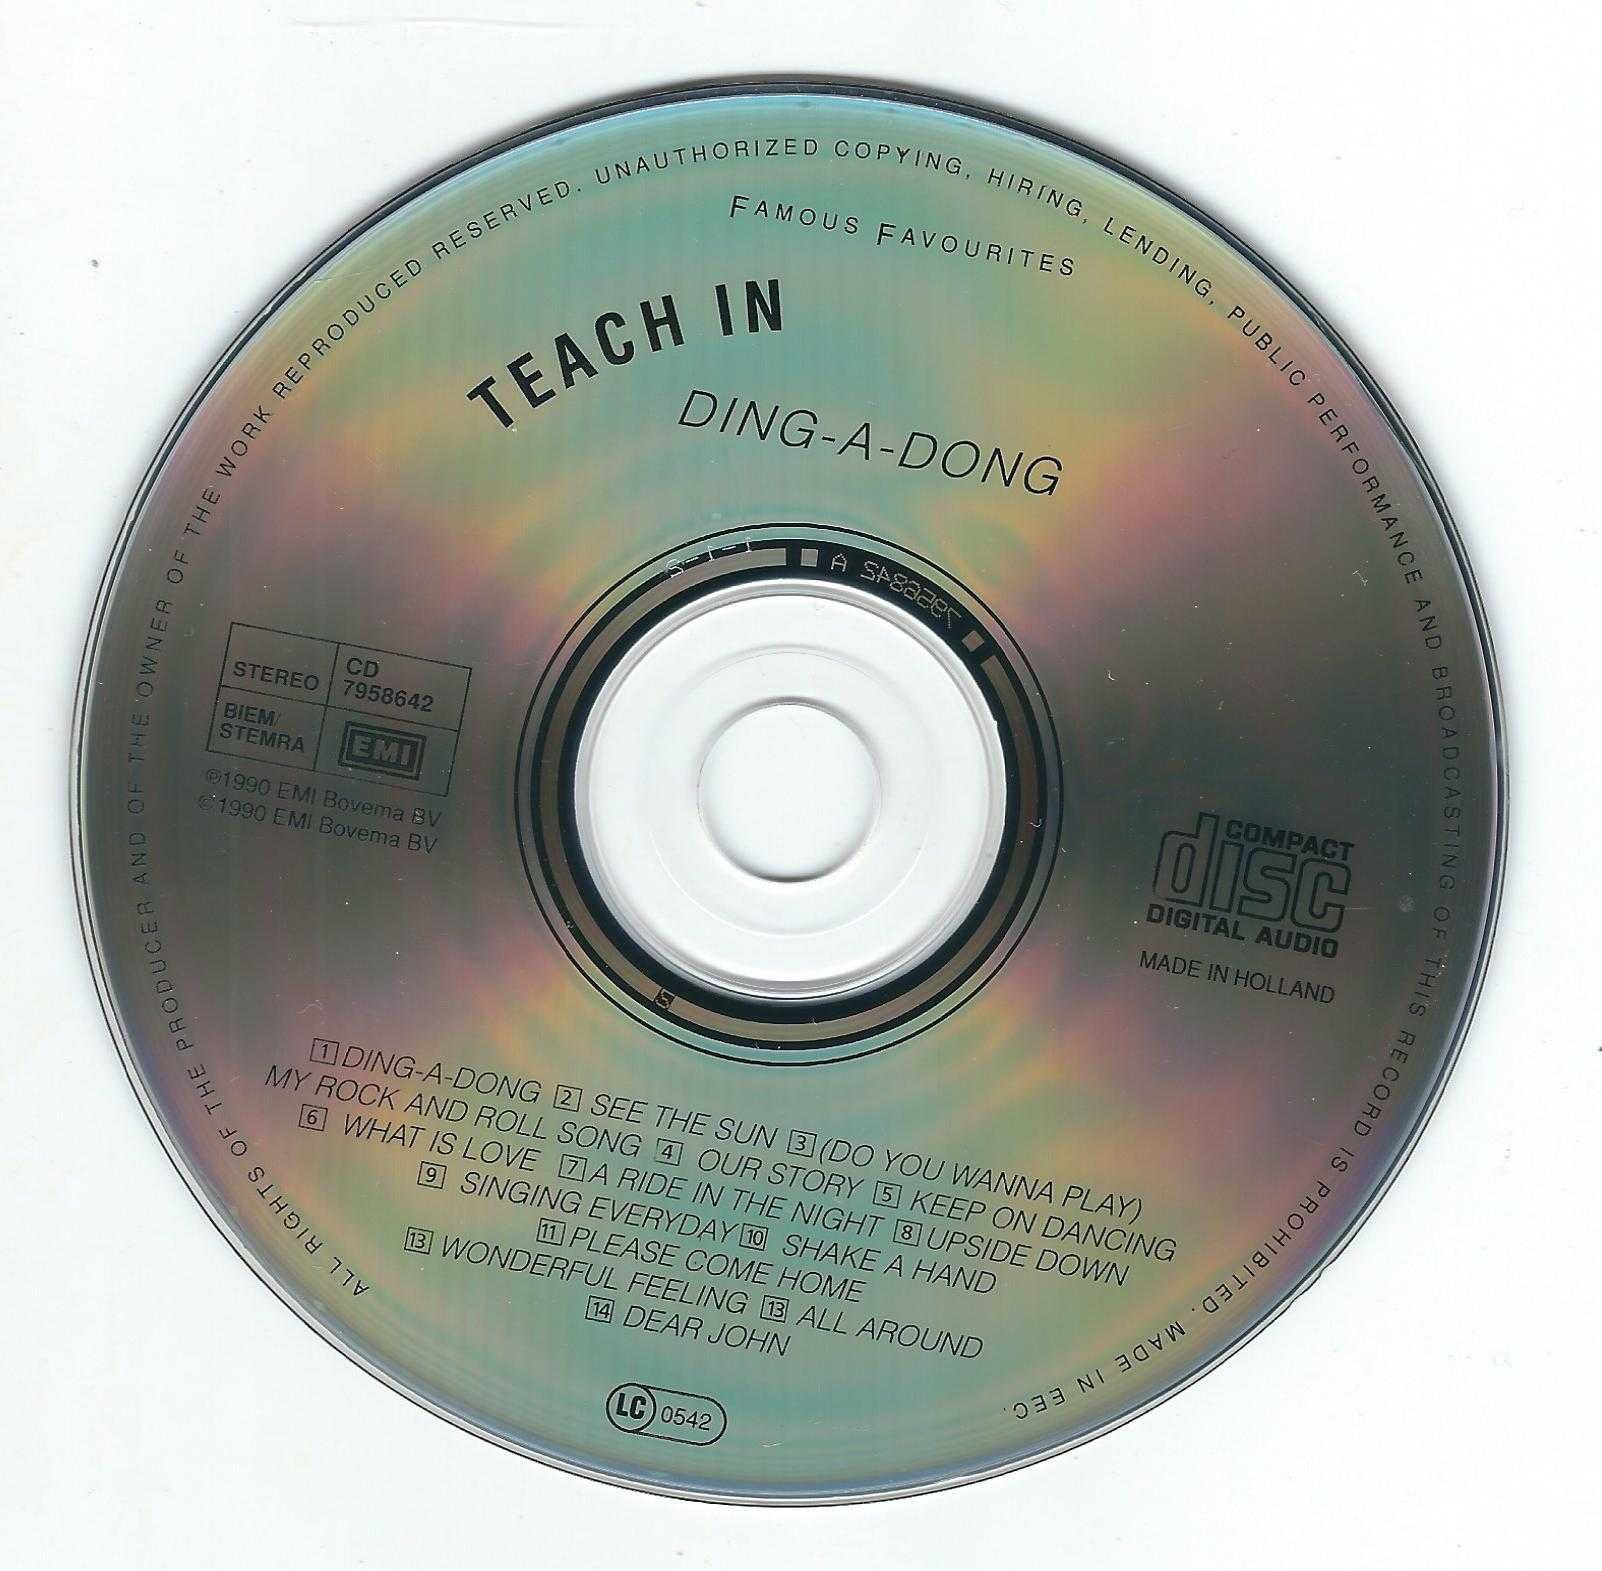 CD Teach-In - Ding-A-Dong (1990) (EMI)